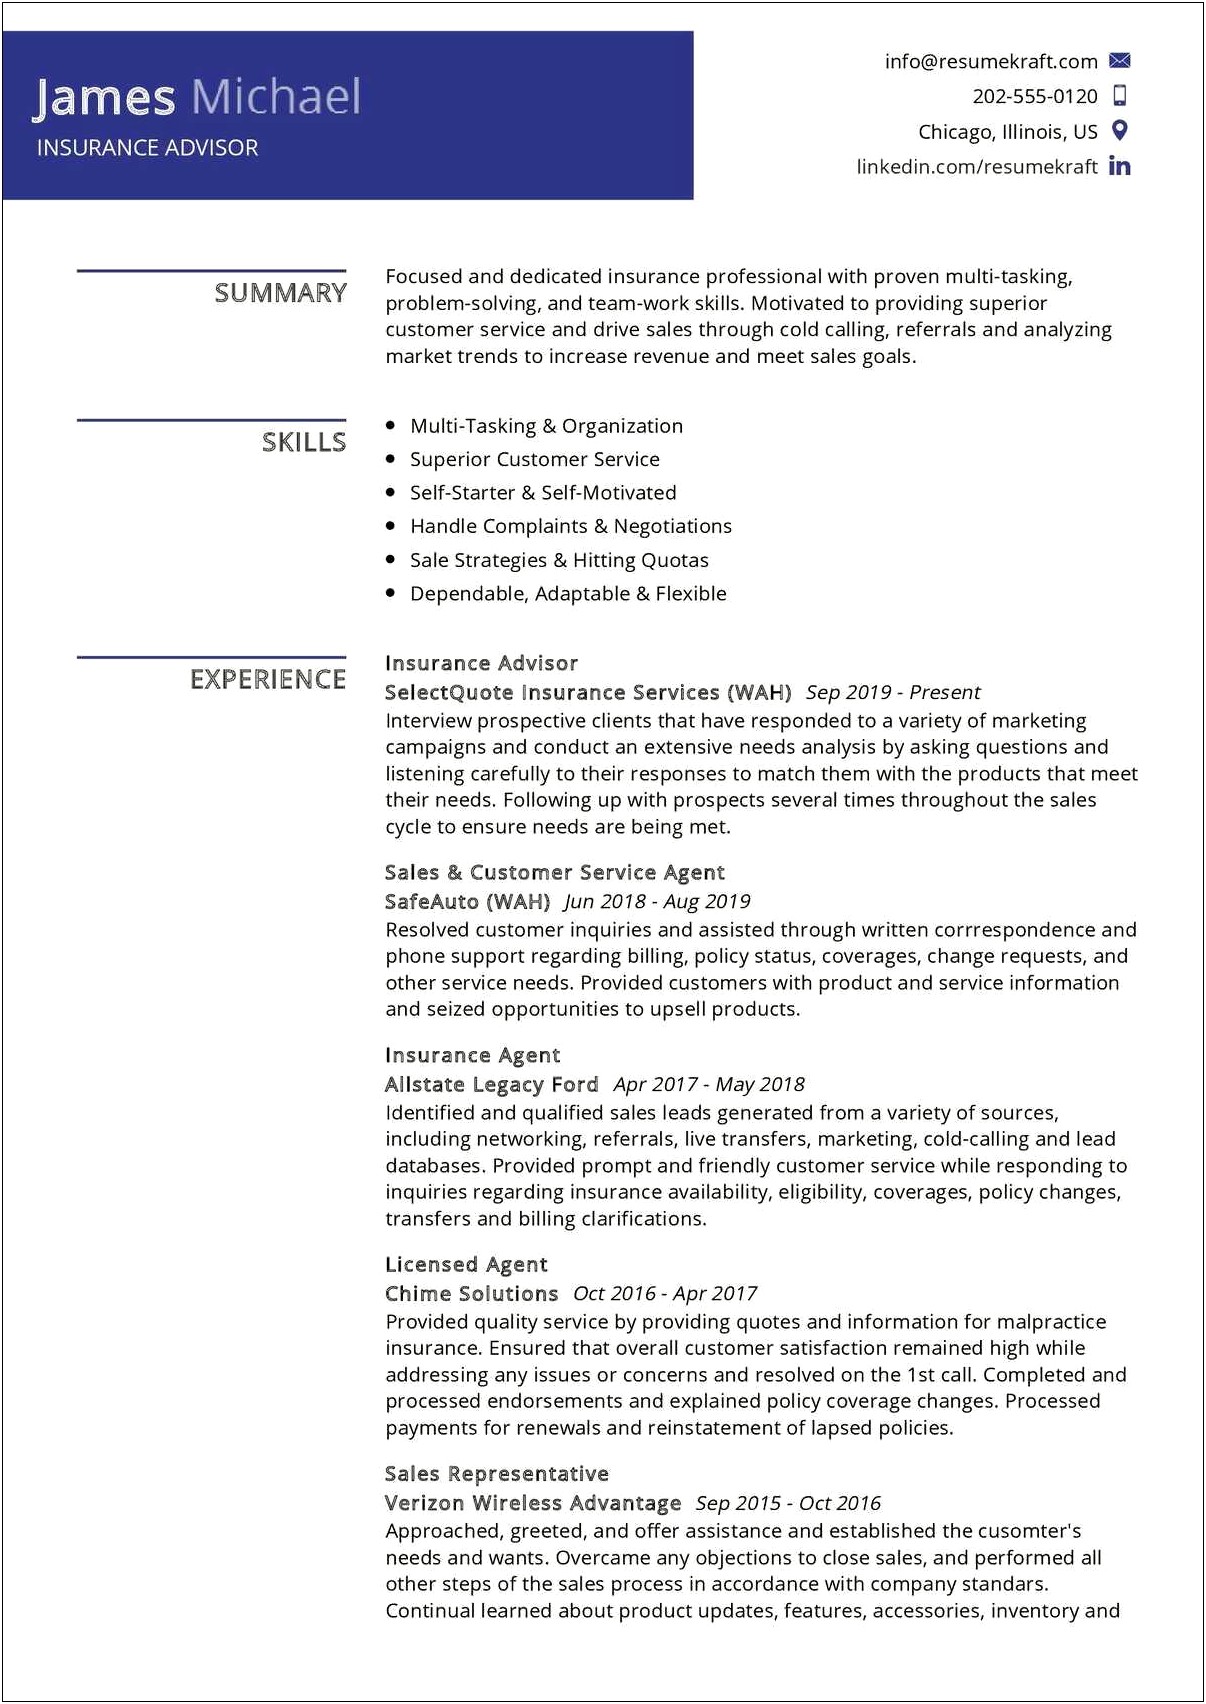 Marketing Manager Insurance Industry Resume Example